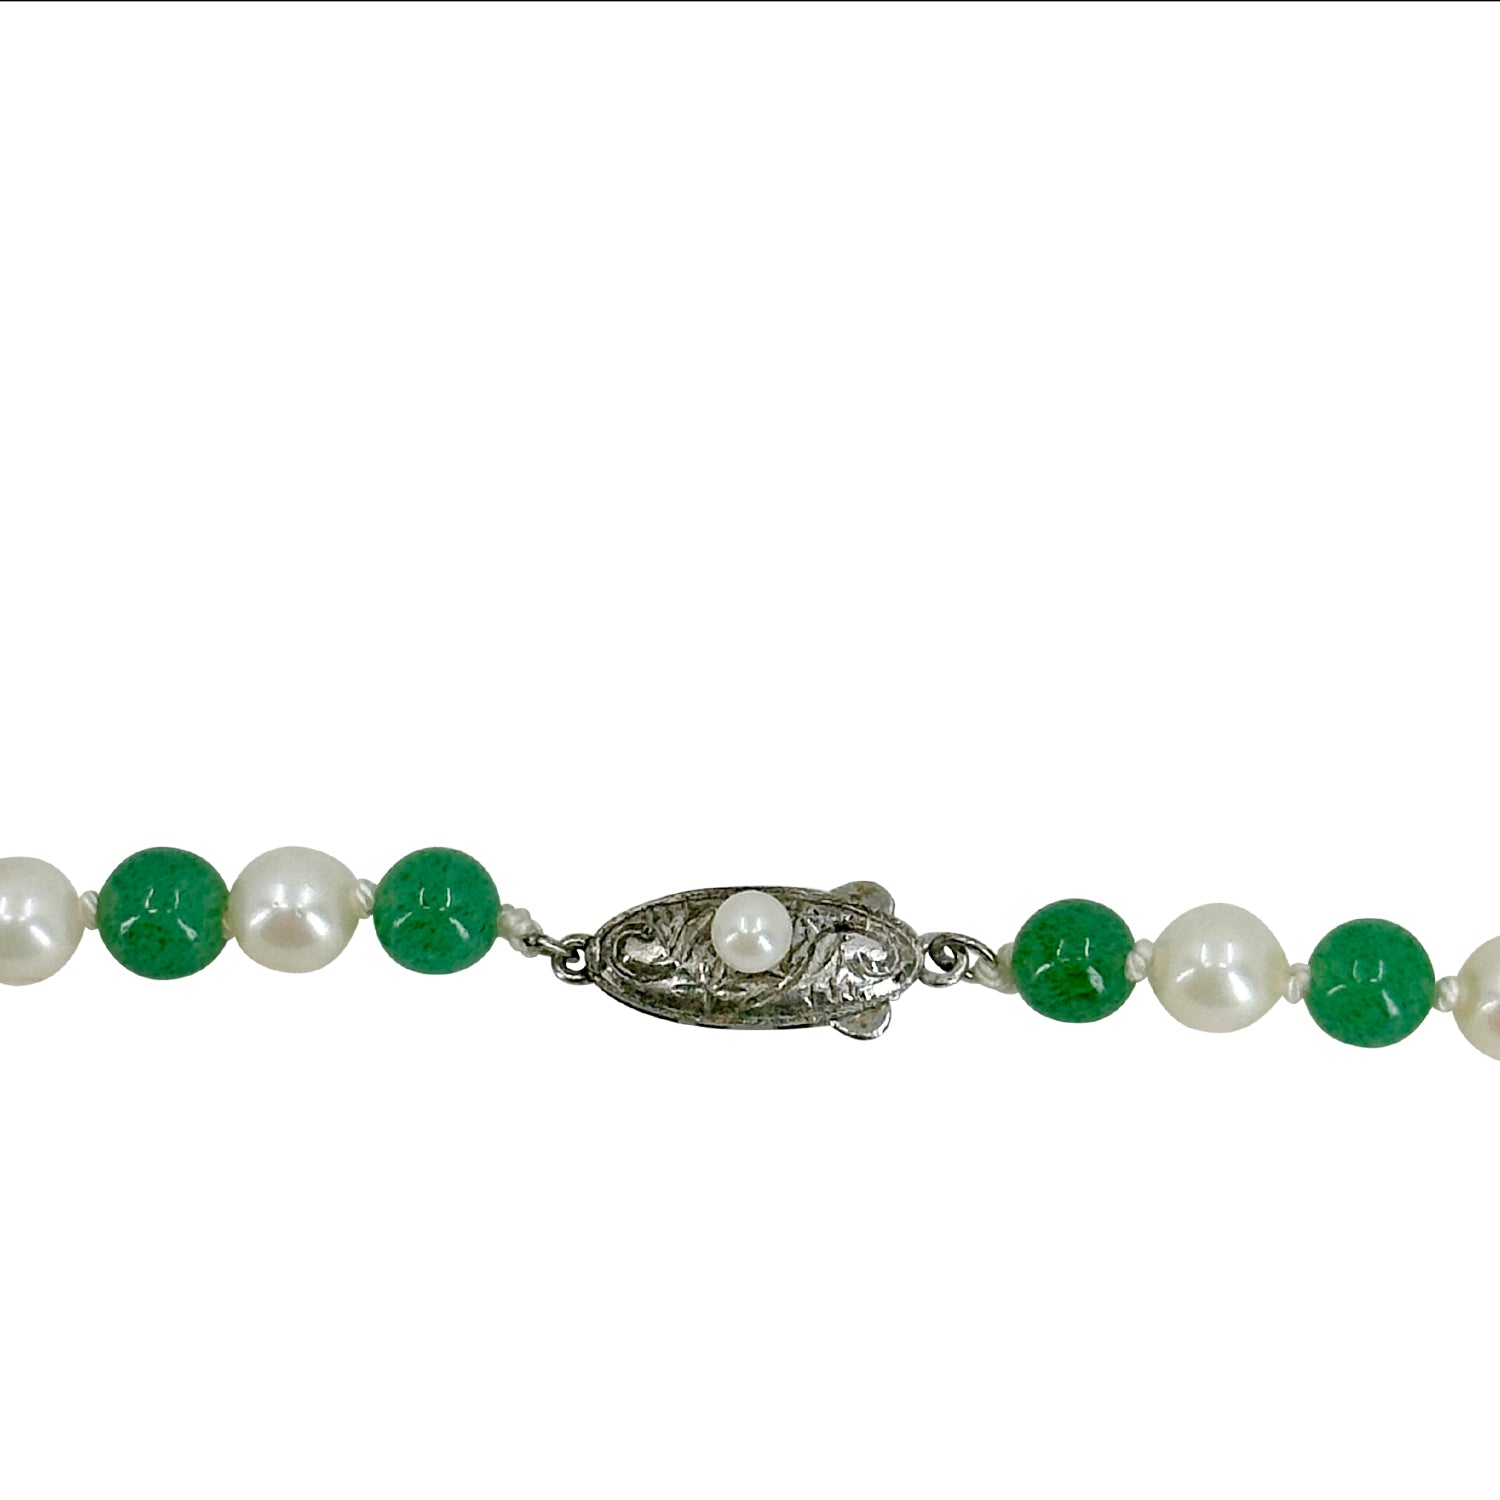 Vintage Green Aventurine Japanese Saltwater Akoya Cultured Pearl Opera Necklace- Sterling Silver 32 Inch